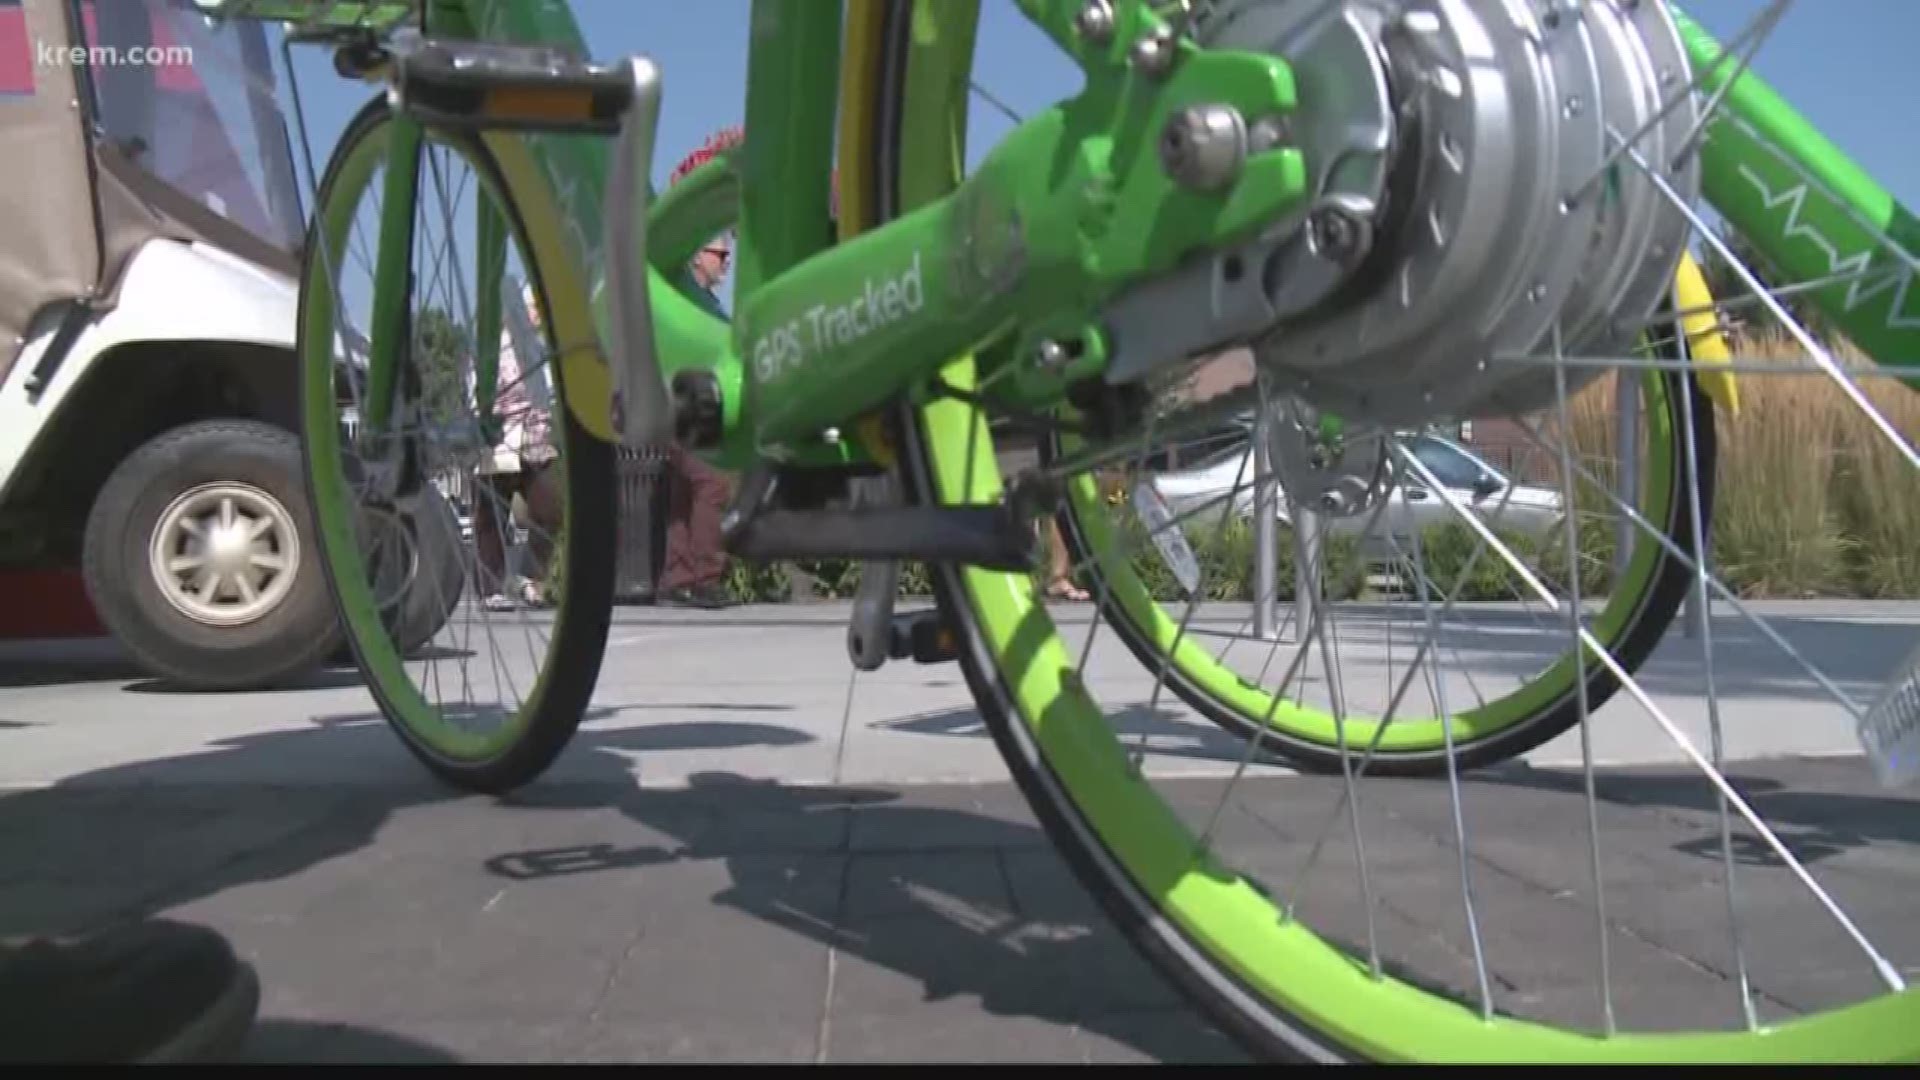 KREM Reporter Tim Pham spoke with Lime Bike users and city officials about a rule prohibiting people from riding the bikes and scooters on downtown sidewalks.